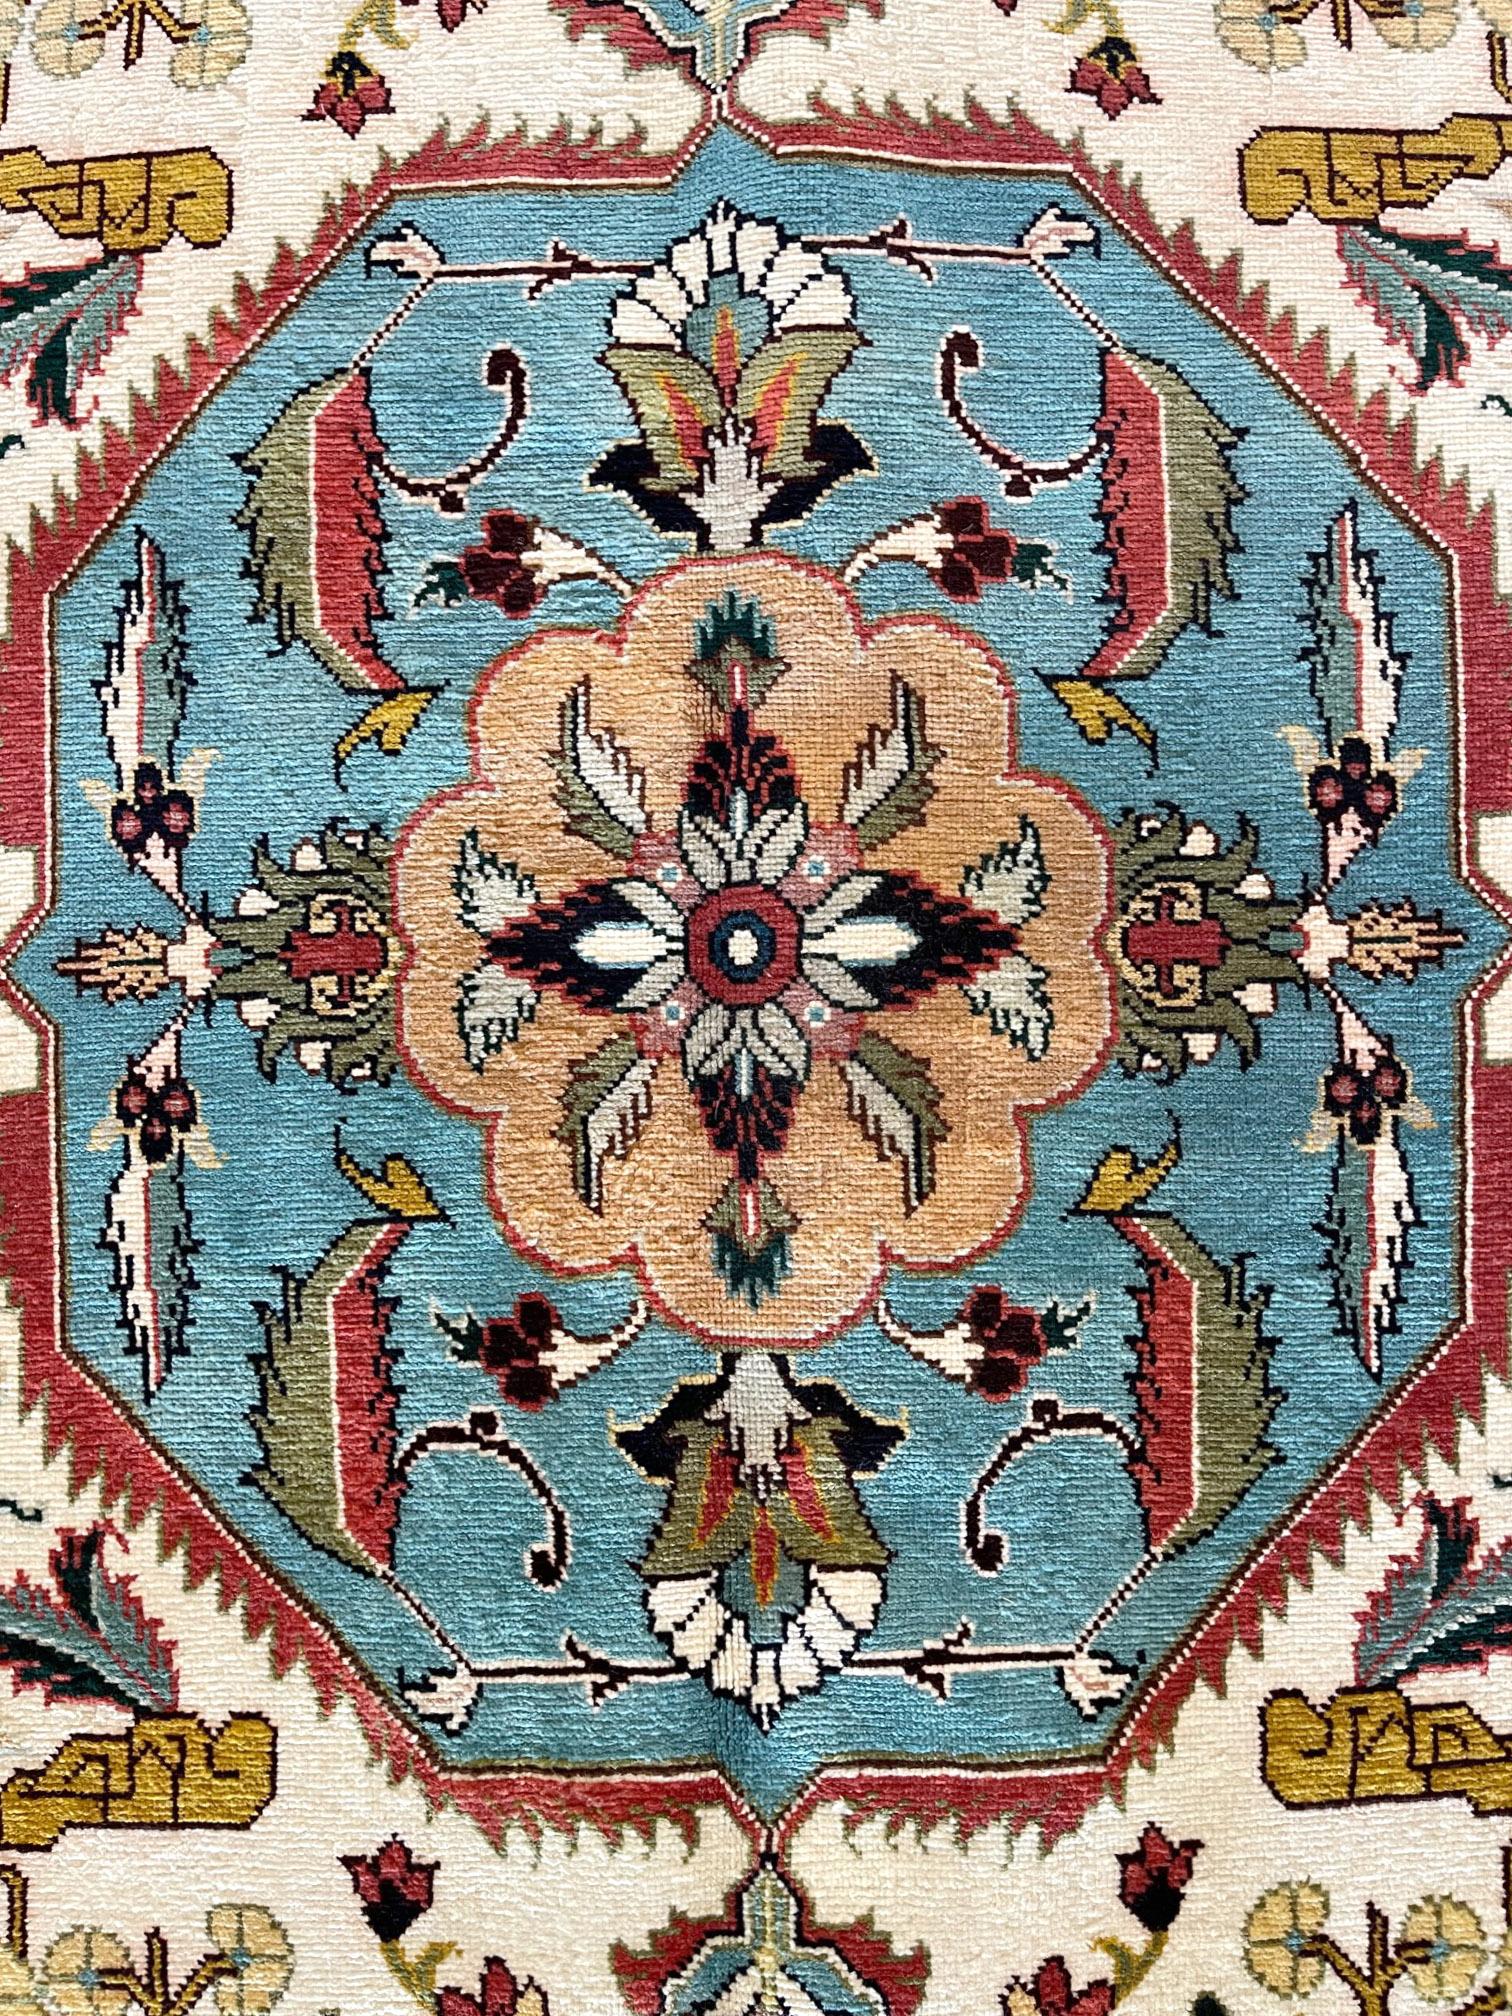 This Persian Tabriz-Heriz rug has wool pile and cotton foundation. This rug has an unsual geometric design with octagonal medallion which can complements modern furnishings and the artistic design enhances the interior of the room. The base color is